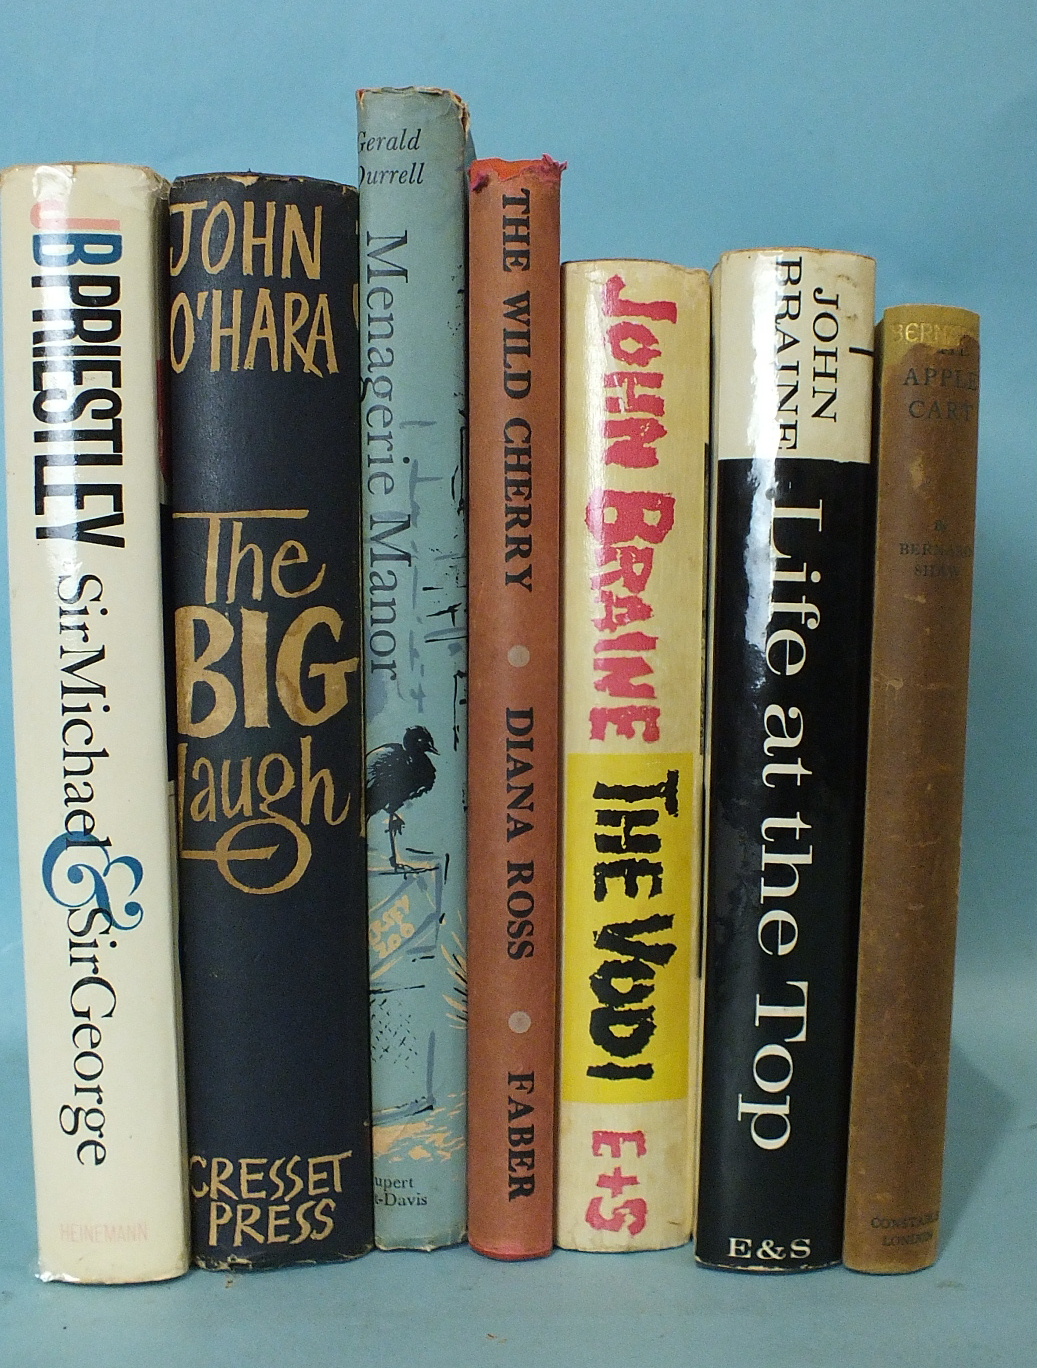 Shaw (George Bernard), The Apple Cart, 1st edn, dwrp, cl gt, 8vo, 1930, other first editions with